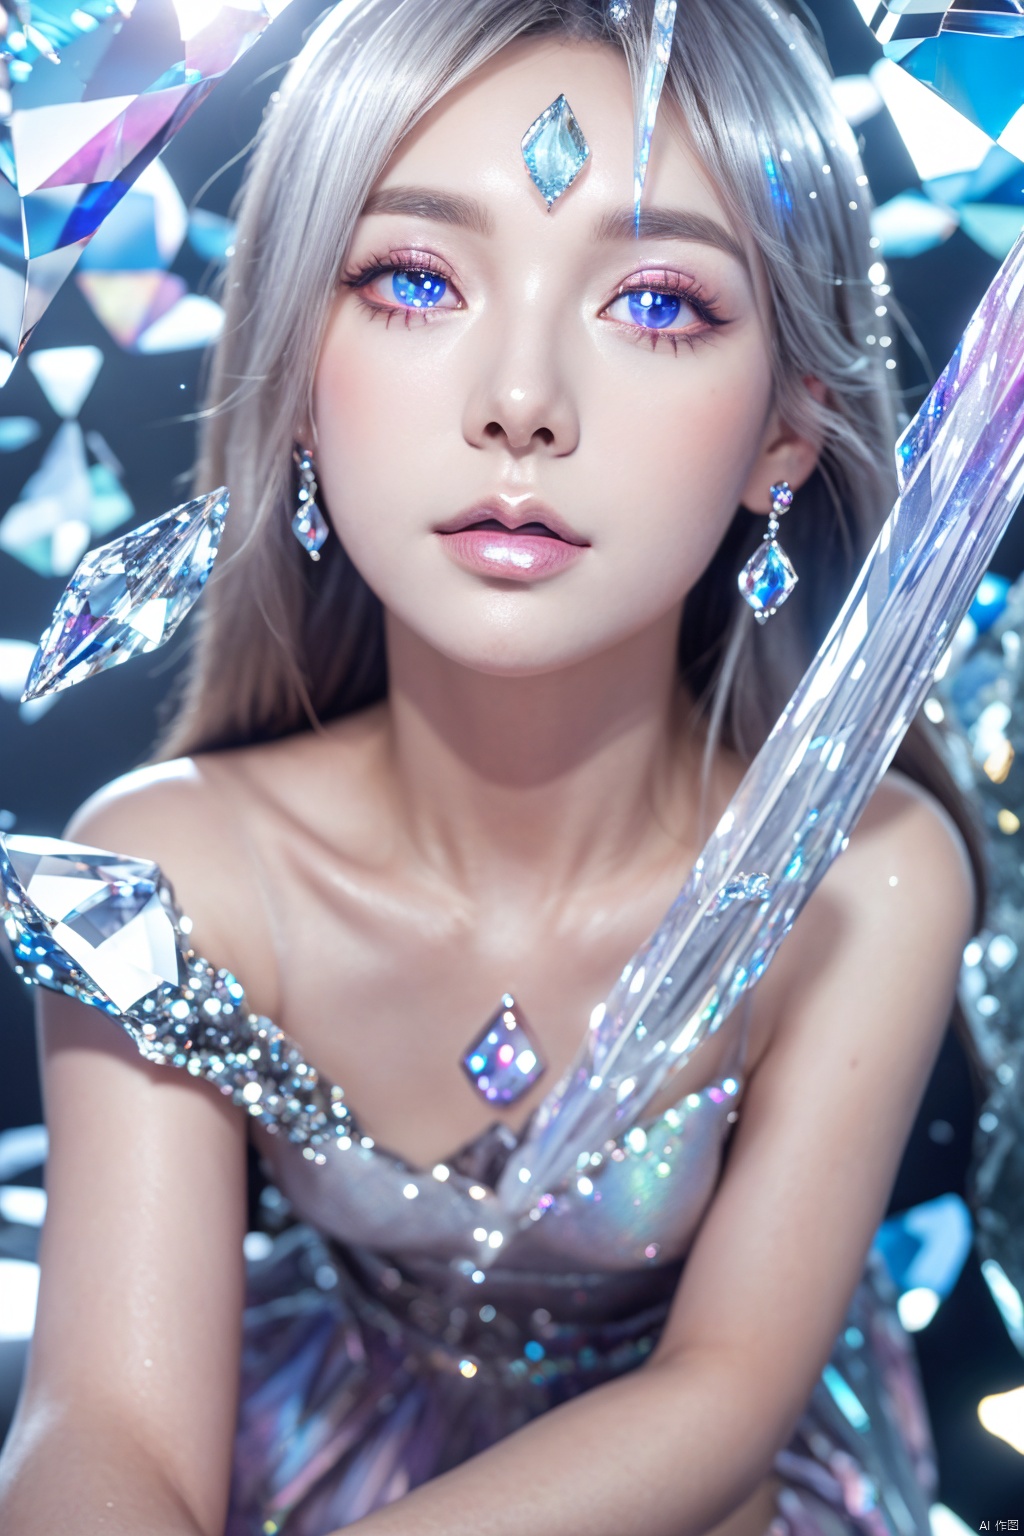  masterpiece,best quality,masterpiece,best quality,official art,extremely detailed CG unity 16k wallpaper,masterpiece,thigh,((1girl)),(science fiction:1.1),(ultra-detailed crystallization:1.5),(crystallizing girl:1.5),kaleidoscope,((iridescent:1.5) long hair),(glittering silver eyes),sitting,surrounded by colorful crystals,blue skin,(skin fusion with crystal:1.8),looking up,face focus,simple dress,transparent crystals,flat dark background,lens flare,prism, 1 girl,between_breasts